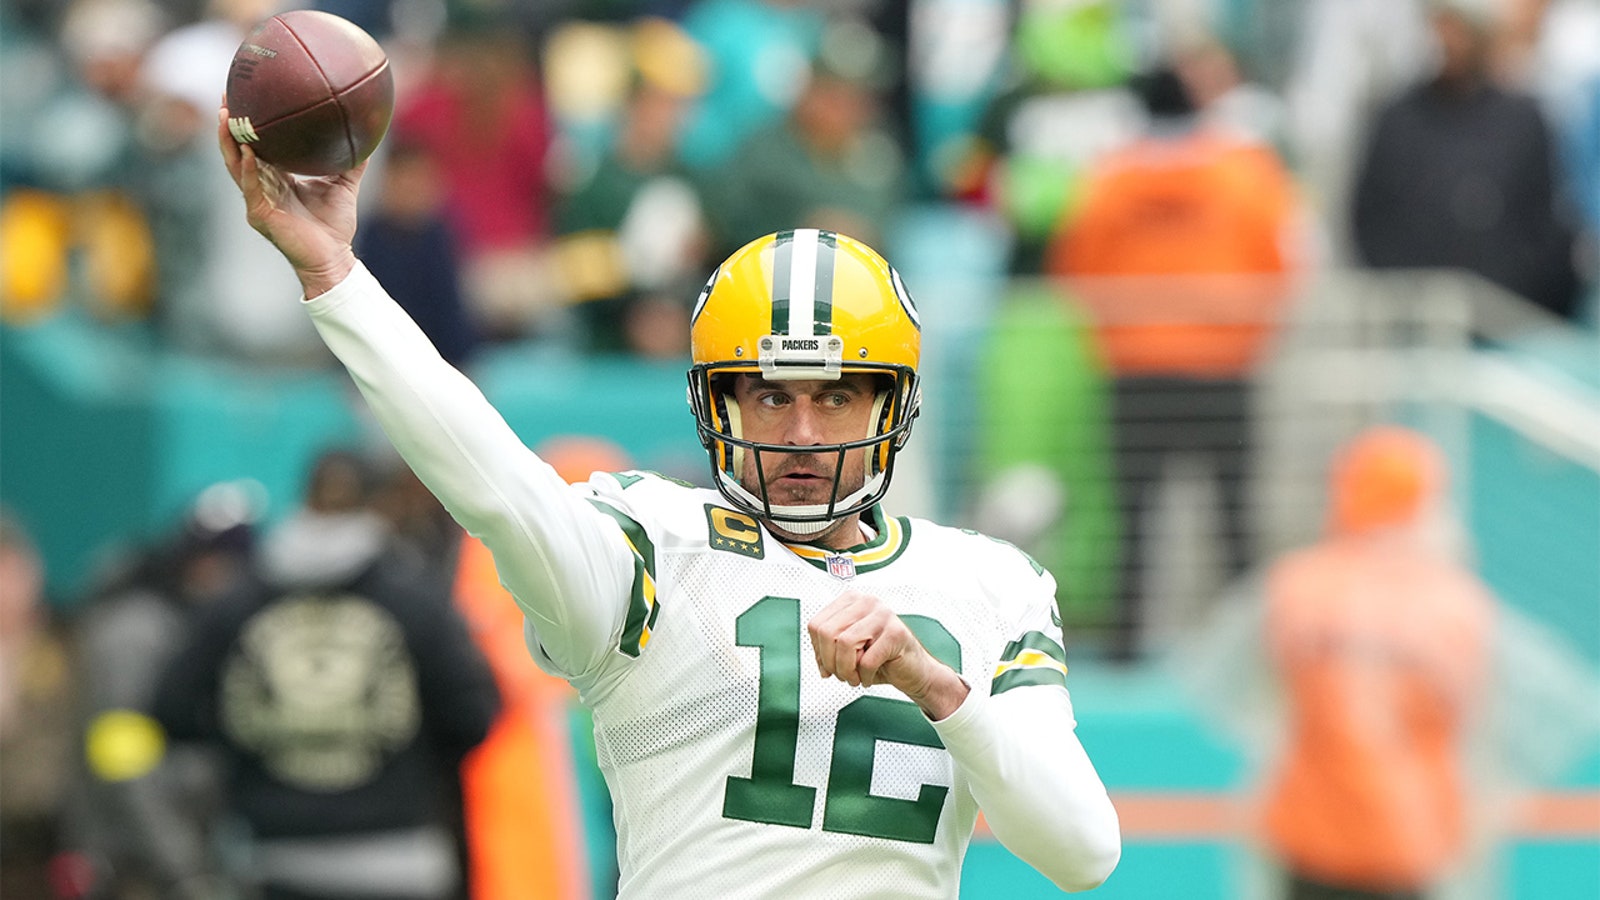 Aaron Rodgers beats Tua Tagovailoa as Packers hold off Dolphins, 26-20